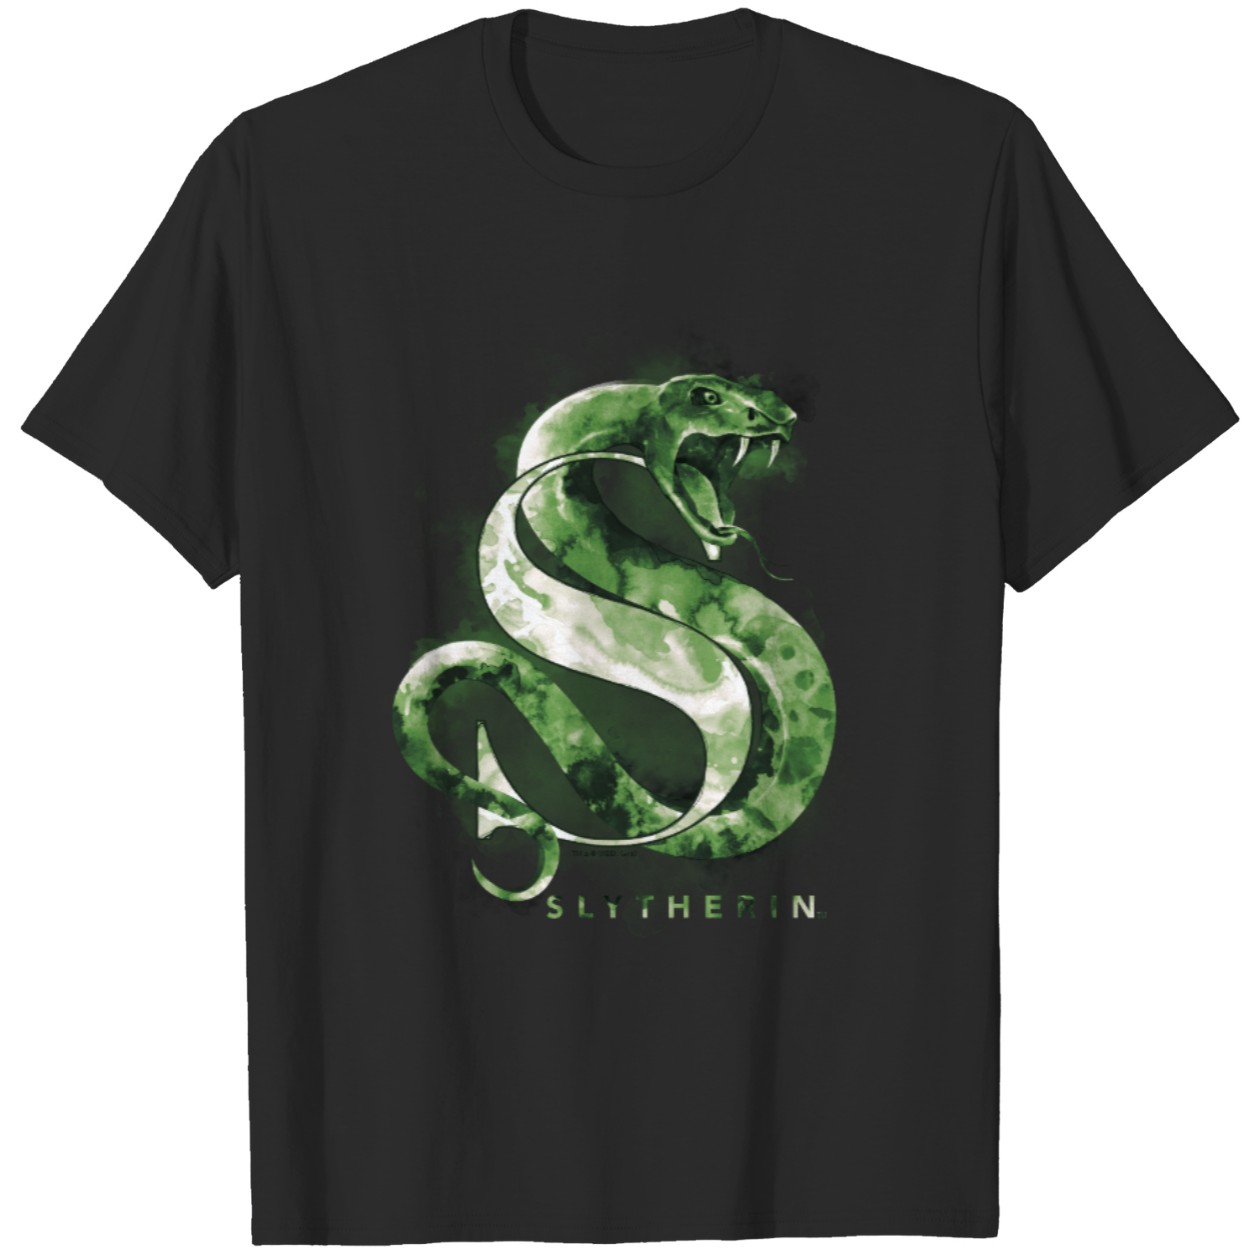 Slytherin Watercolor Snake Graphic T-Shirt IYT